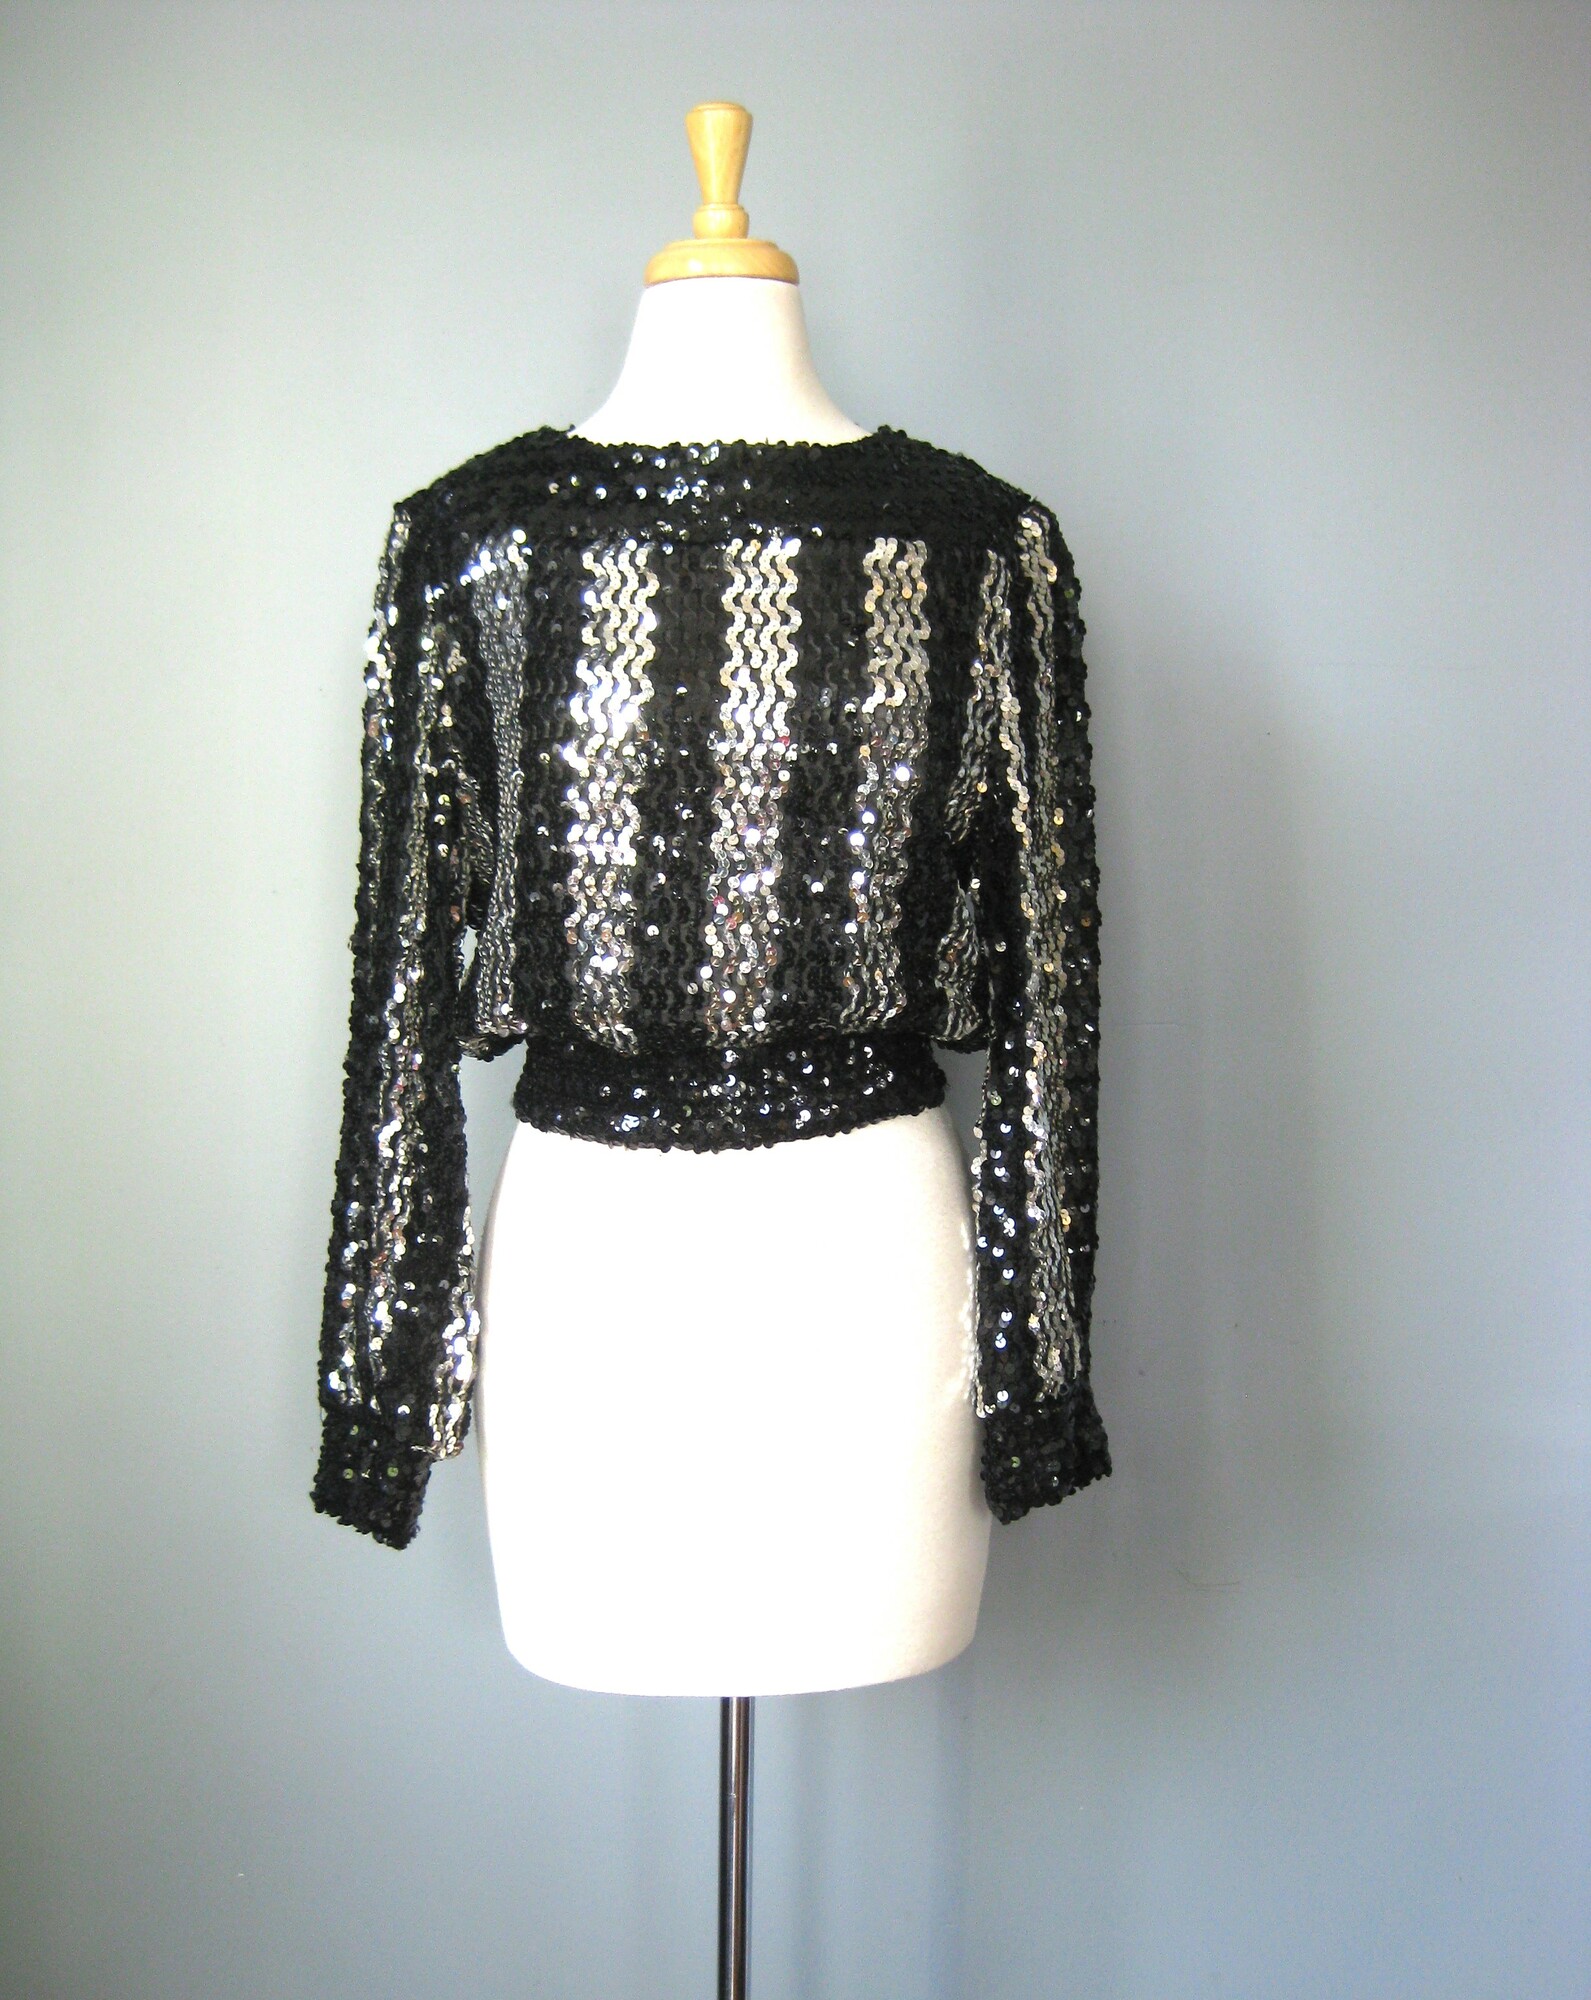 Vtg Caron Sequined Top, Black, Size: Medium
Fun sweater for evening.
Black and silver sequins arranged in wide vertical stripes on the front, back and sleeves.
It has a kind of baseball jacket/sweatshirt silhouetter, elasticized at cuffs and waist and somewhat cropped.
Squarish neckline
unlined
Quite stretchy overall, including the waistband but the cuffs have lost a good deal of their snap.
by Caron, cute label
Made in the USA

Flat measurements:
shoulder to shoulder: 16
armpit to armpit: 20 unstretched
waist: 13.75 stretches comfortably to 17
length: 20

Thanks for looking!
#43429